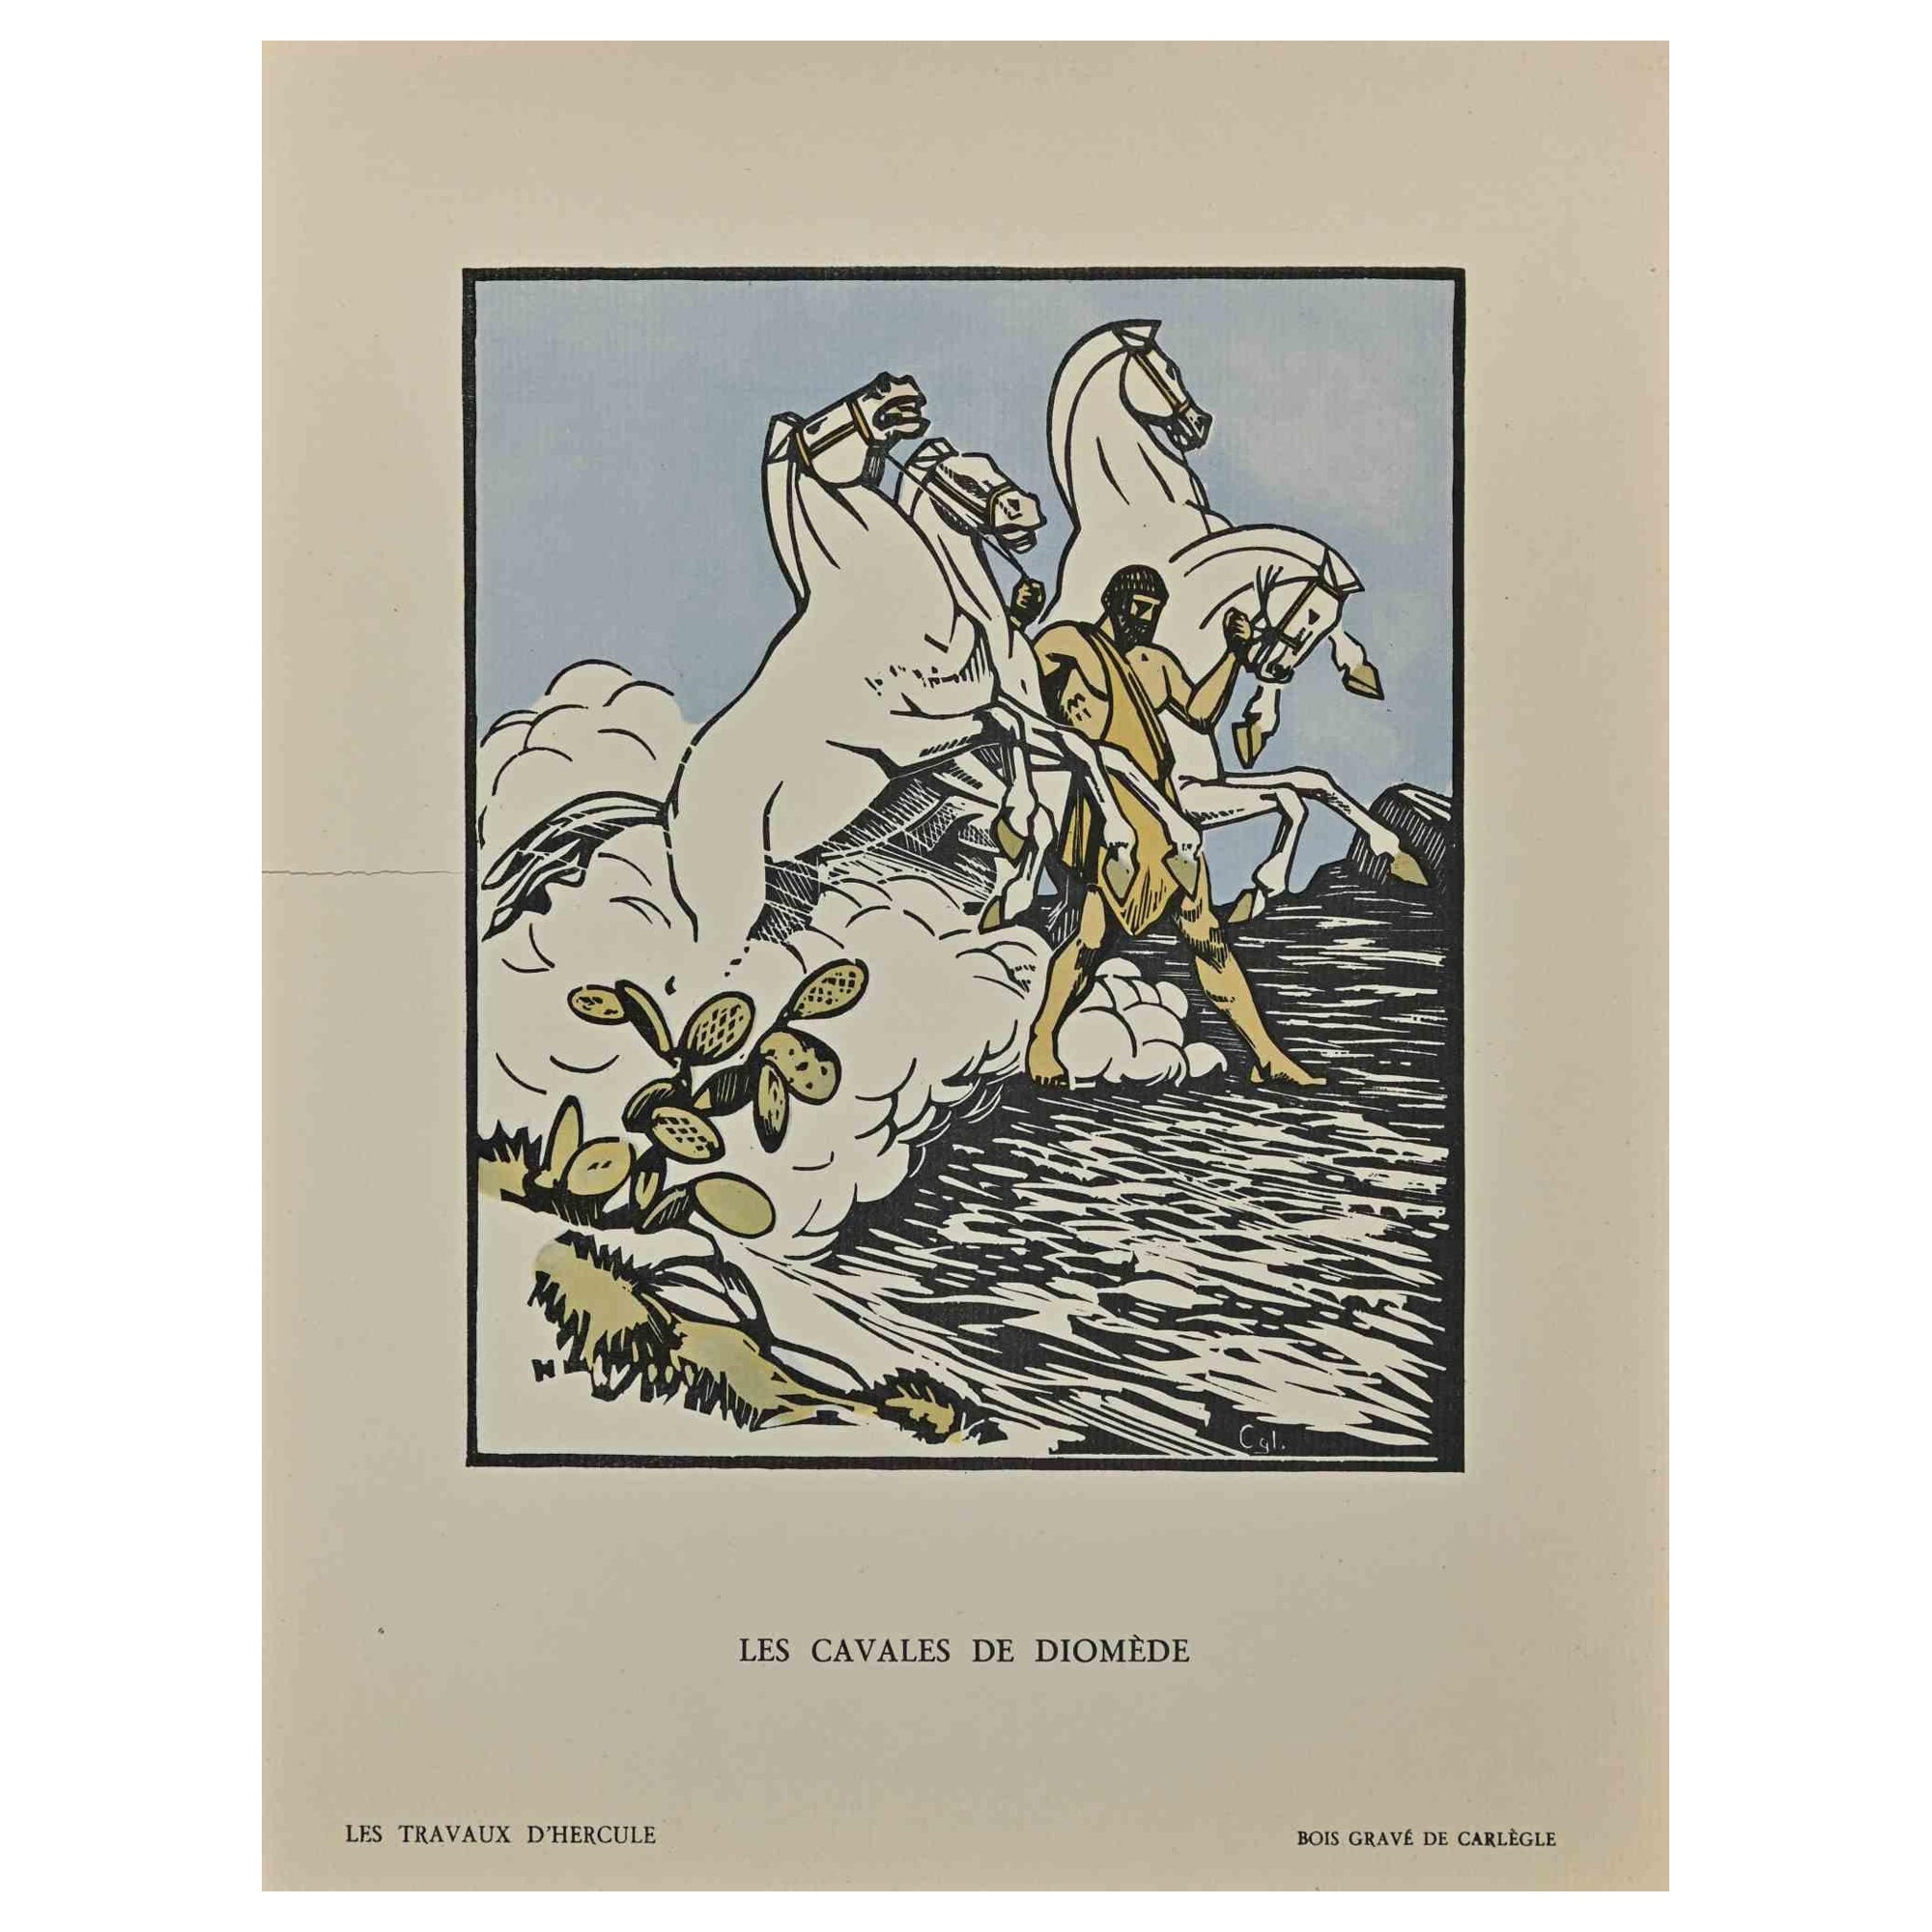 Les Cavles de Diomède an Original Woodcut Print realized by Carlègle (Charles Emile Egli, 30 March 1877 – 11 January 1937).

Belong to the series "Les Travaux D'Hercule".

Good condition on a yellowed cardboard.

Titled, Stamp Signed on the lower